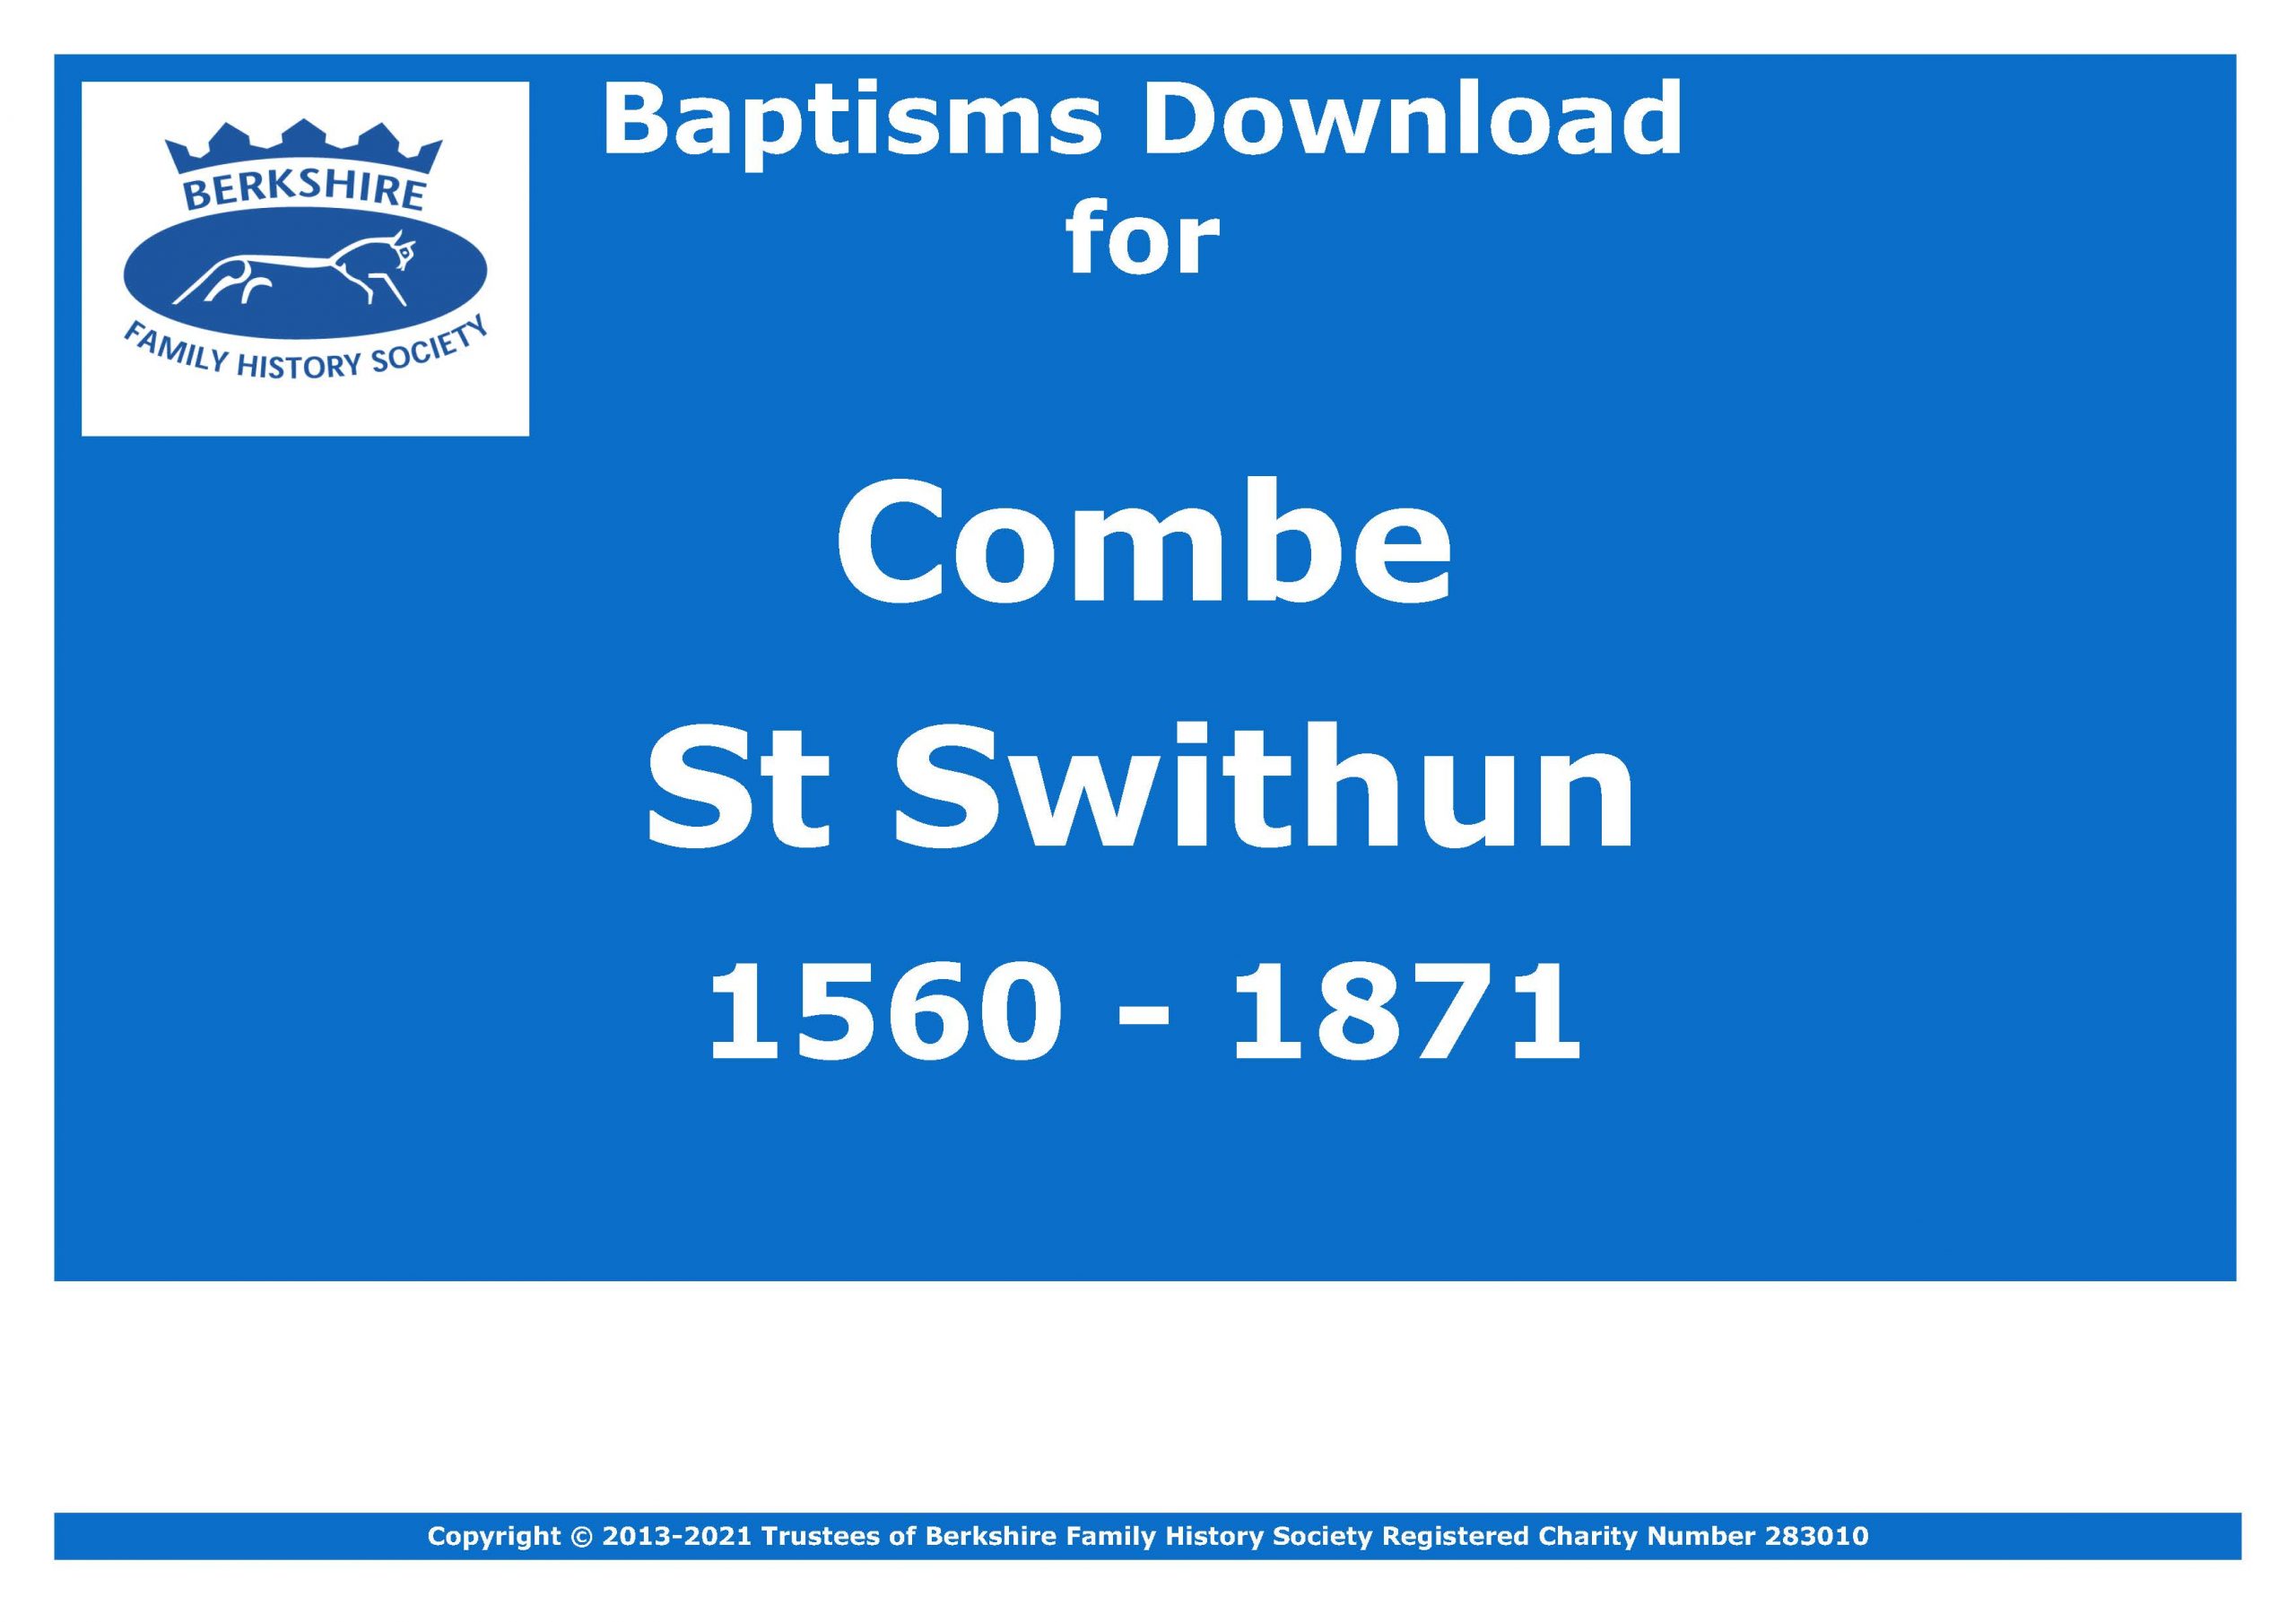 Combe St Swithun Baptisms 1560-1871 (Download) D1619